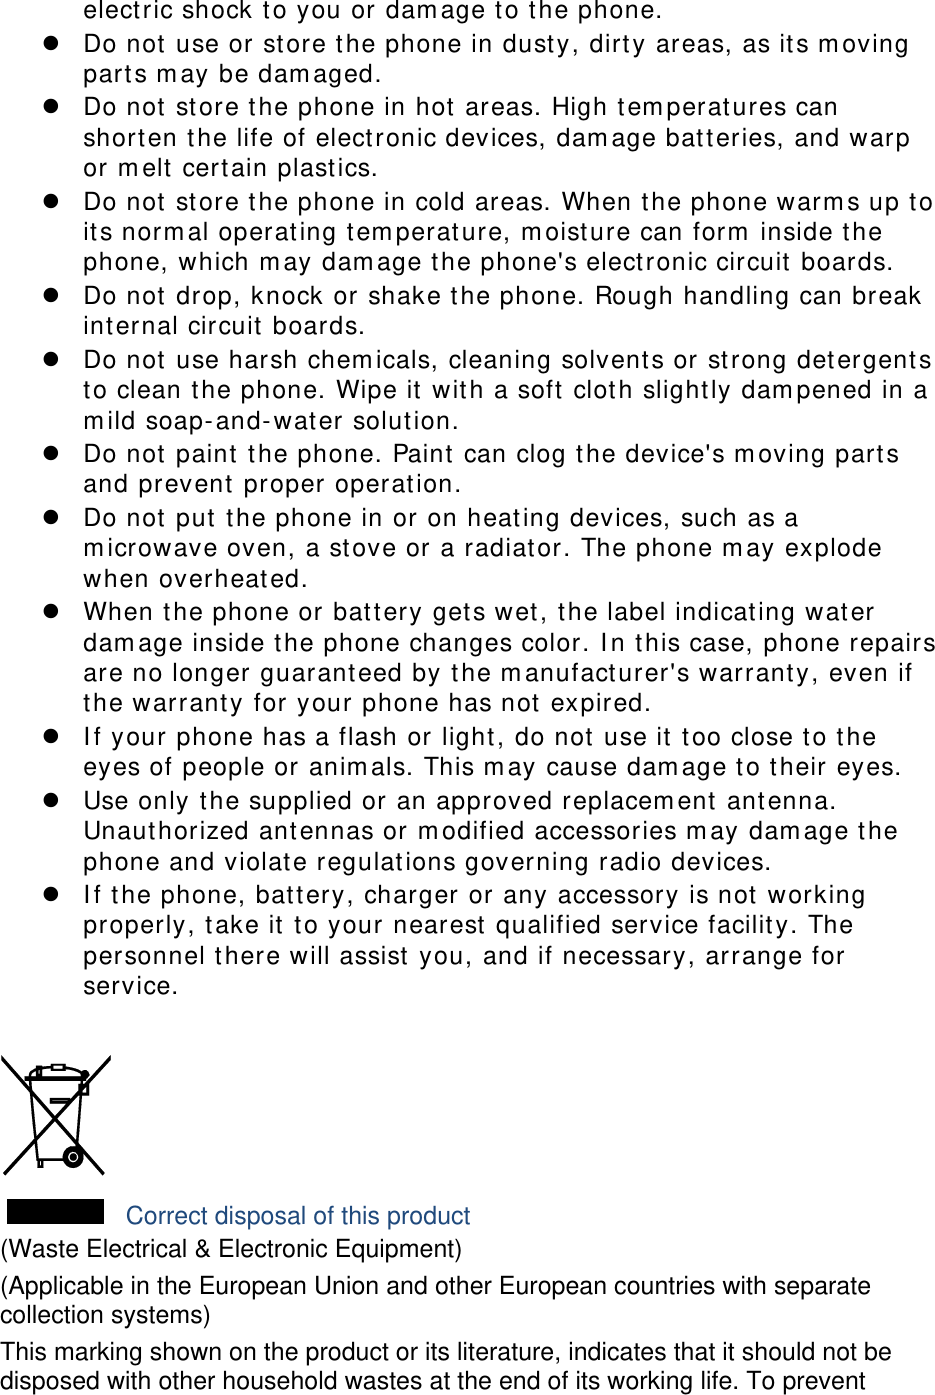 electric shock to you or damage to the phone.  Do not use or store the phone in dusty, dirty areas, as its moving parts may be damaged.  Do not store the phone in hot areas. High temperatures can shorten the life of electronic devices, damage batteries, and warp or melt certain plastics.  Do not store the phone in cold areas. When the phone warms up to its normal operating temperature, moisture can form inside the phone, which may damage the phone&apos;s electronic circuit boards.  Do not drop, knock or shake the phone. Rough handling can break internal circuit boards.  Do not use harsh chemicals, cleaning solvents or strong detergents to clean the phone. Wipe it with a soft cloth slightly dampened in a mild soap-and-water solution.  Do not paint the phone. Paint can clog the device&apos;s moving parts and prevent proper operation.  Do not put the phone in or on heating devices, such as a microwave oven, a stove or a radiator. The phone may explode when overheated.  When the phone or battery gets wet, the label indicating water damage inside the phone changes color. In this case, phone repairs are no longer guaranteed by the manufacturer&apos;s warranty, even if the warranty for your phone has not expired.   If your phone has a flash or light, do not use it too close to the eyes of people or animals. This may cause damage to their eyes.  Use only the supplied or an approved replacement antenna. Unauthorized antennas or modified accessories may damage the phone and violate regulations governing radio devices.  If the phone, battery, charger or any accessory is not working properly, take it to your nearest qualified service facility. The personnel there will assist you, and if necessary, arrange for service.   Correct disposal of this product (Waste Electrical &amp; Electronic Equipment) (Applicable in the European Union and other European countries with separate collection systems) This marking shown on the product or its literature, indicates that it should not be disposed with other household wastes at the end of its working life. To prevent 